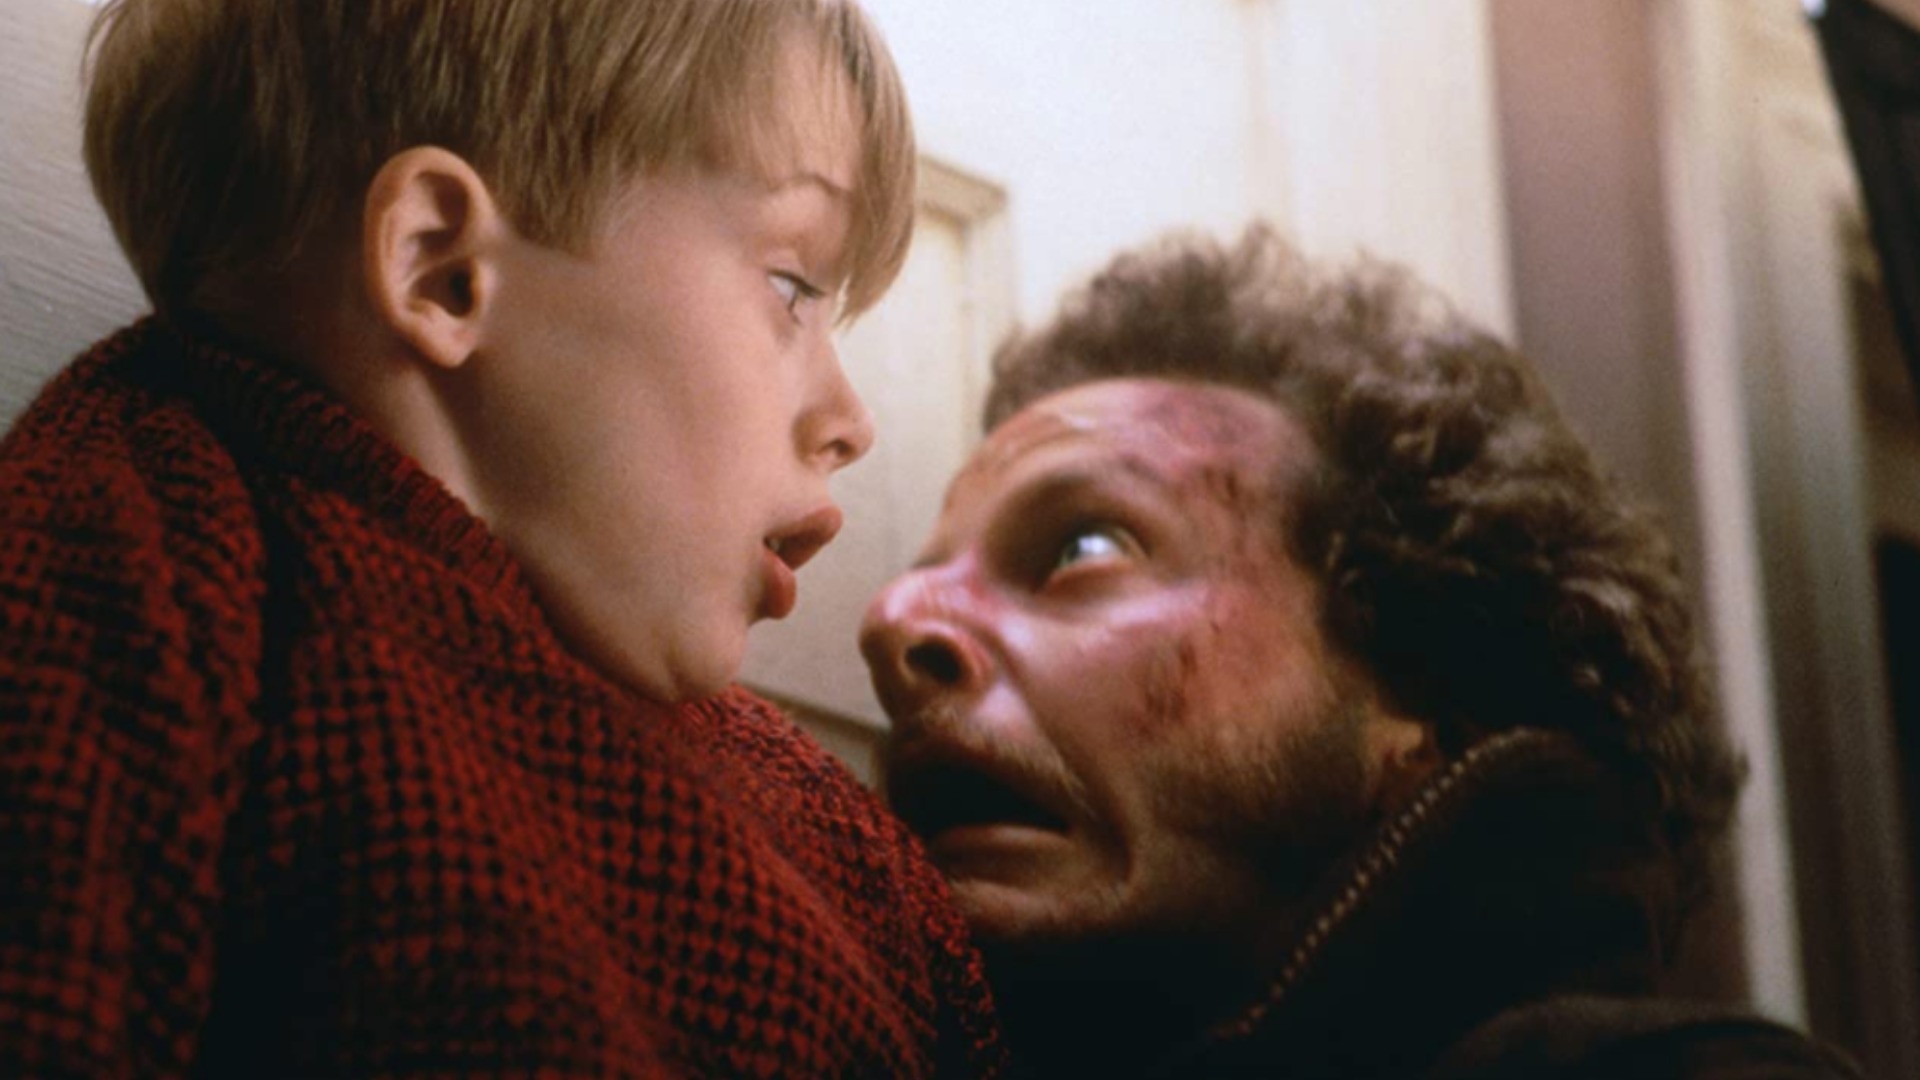 home alone 4 initial release